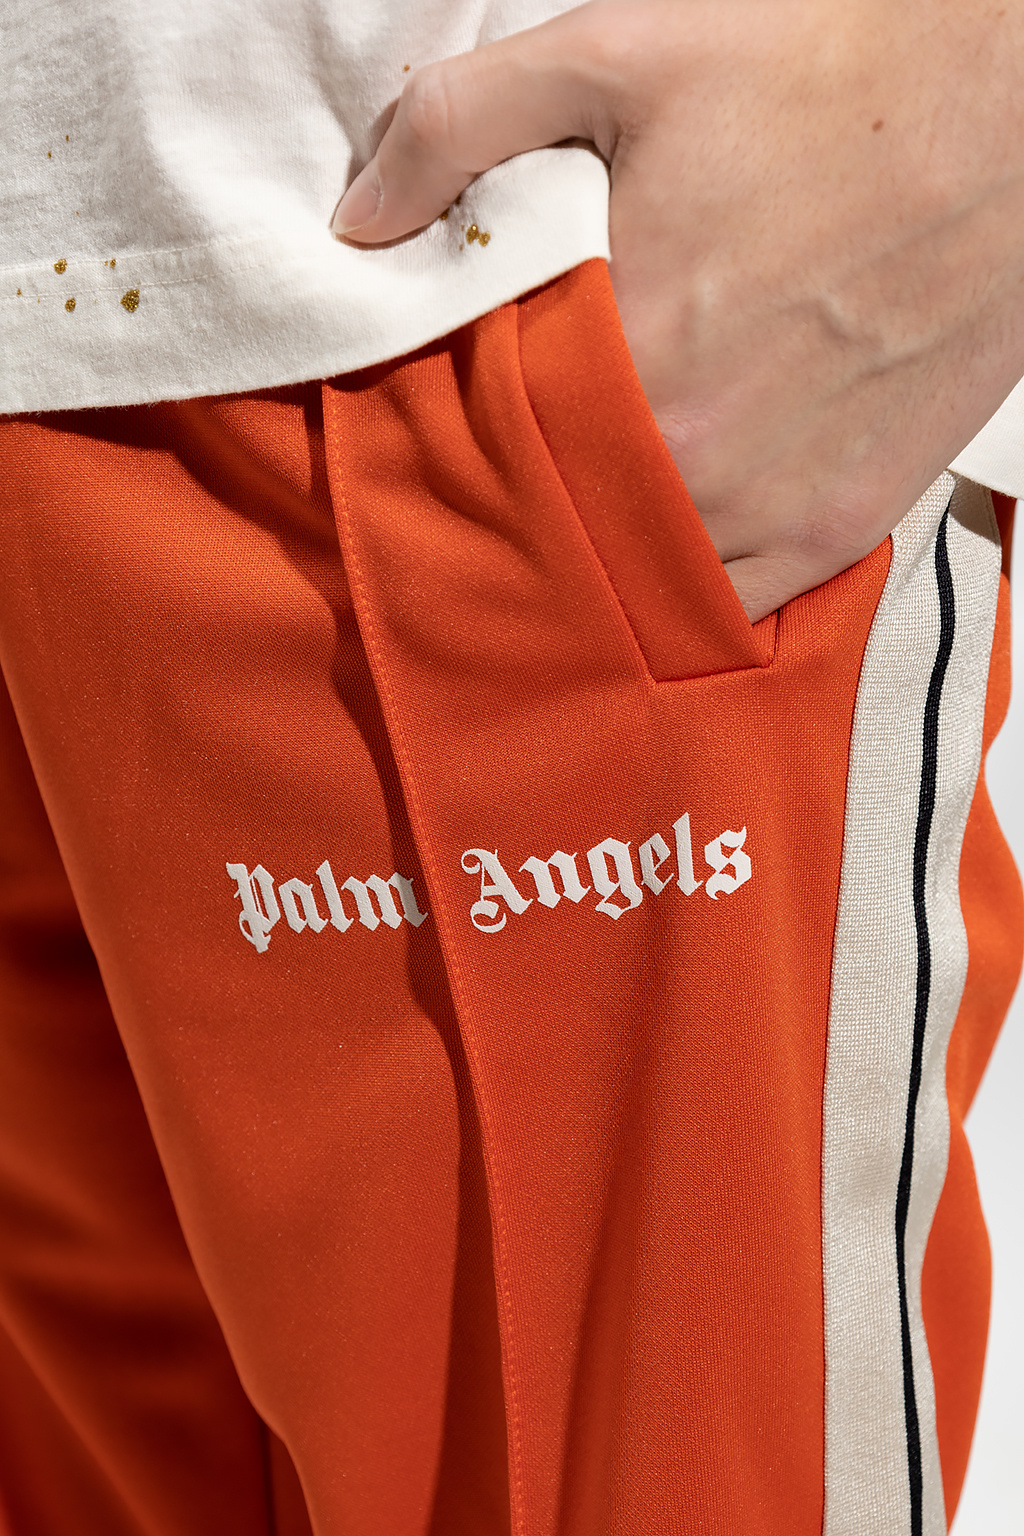 PALM ANGELS TRACK PANTS in orange - Palm Angels® Official